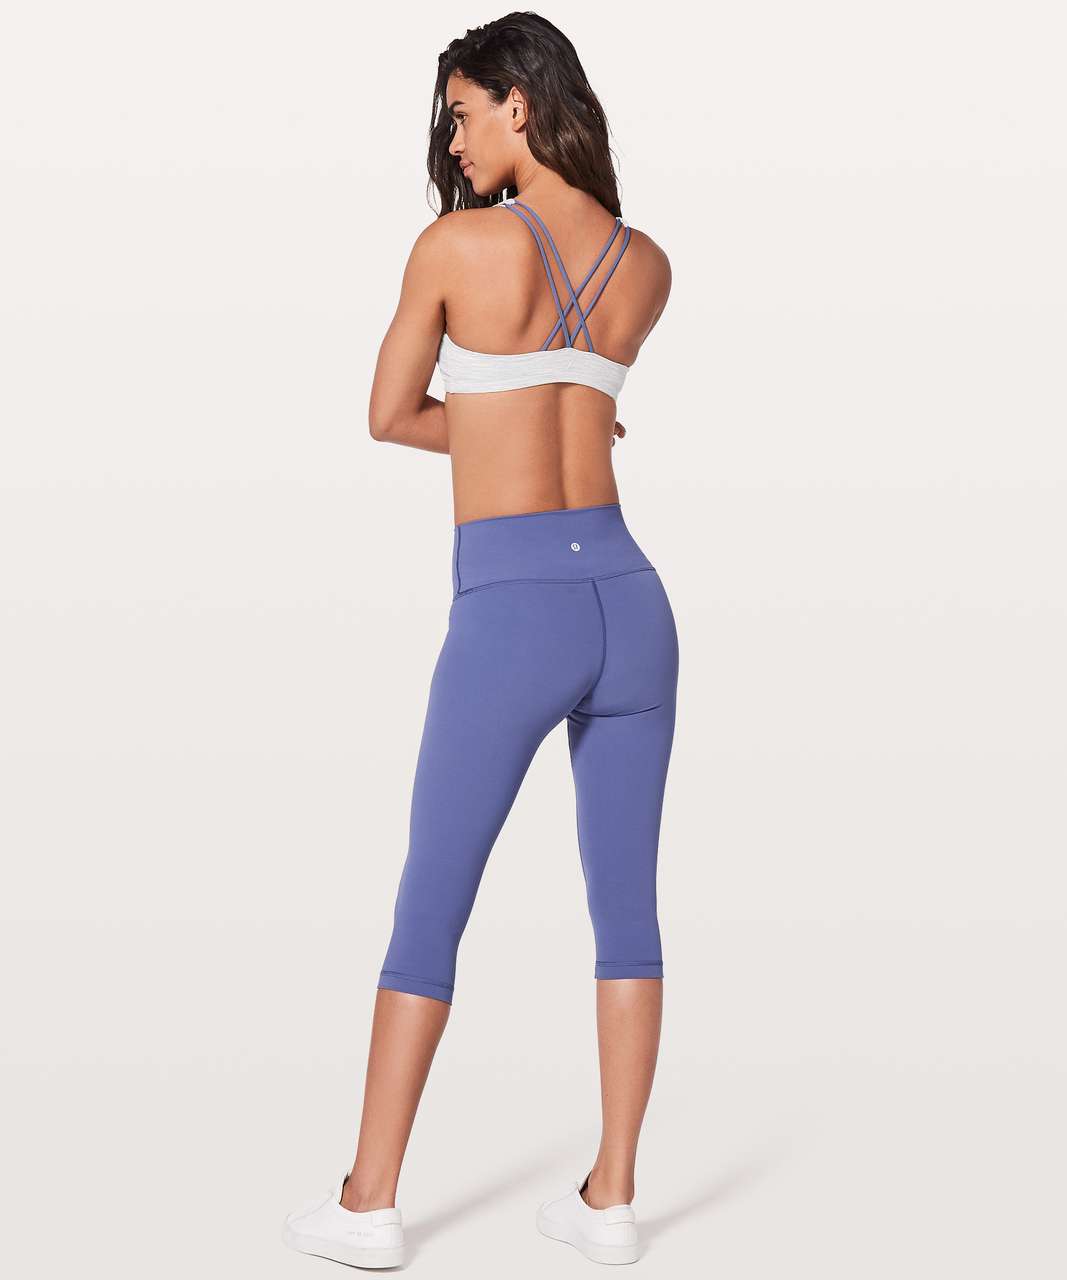 Lululemon Free To Be Bra - Wee Are From Space Nimbus Battleship / Brilliant Blue